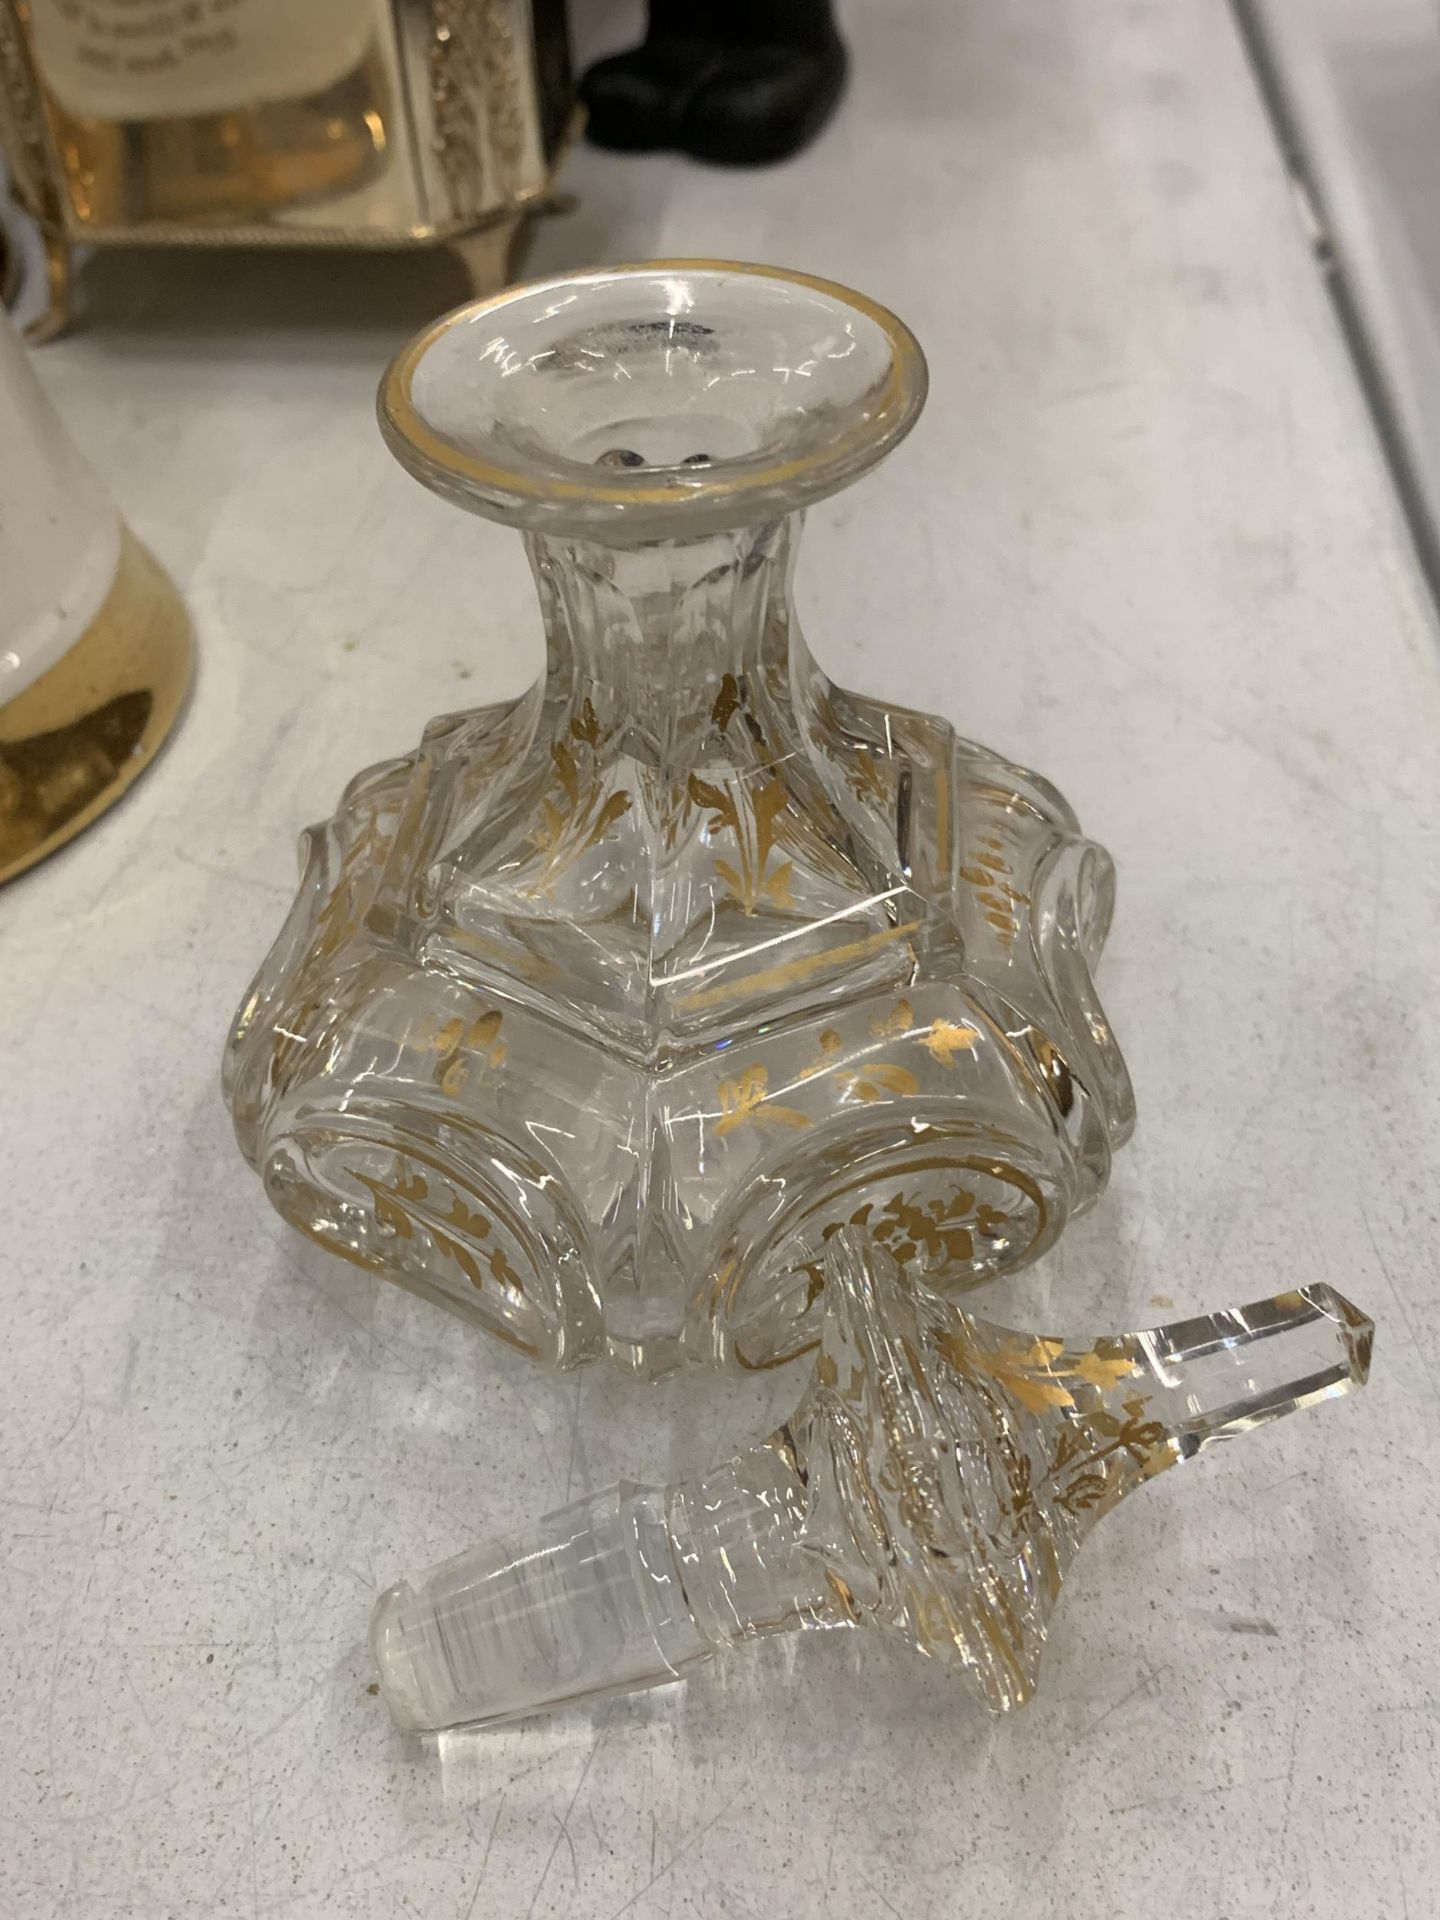 A GEORGIAN GLASS AND GILDED PERFUME BOTTLE - Image 2 of 2